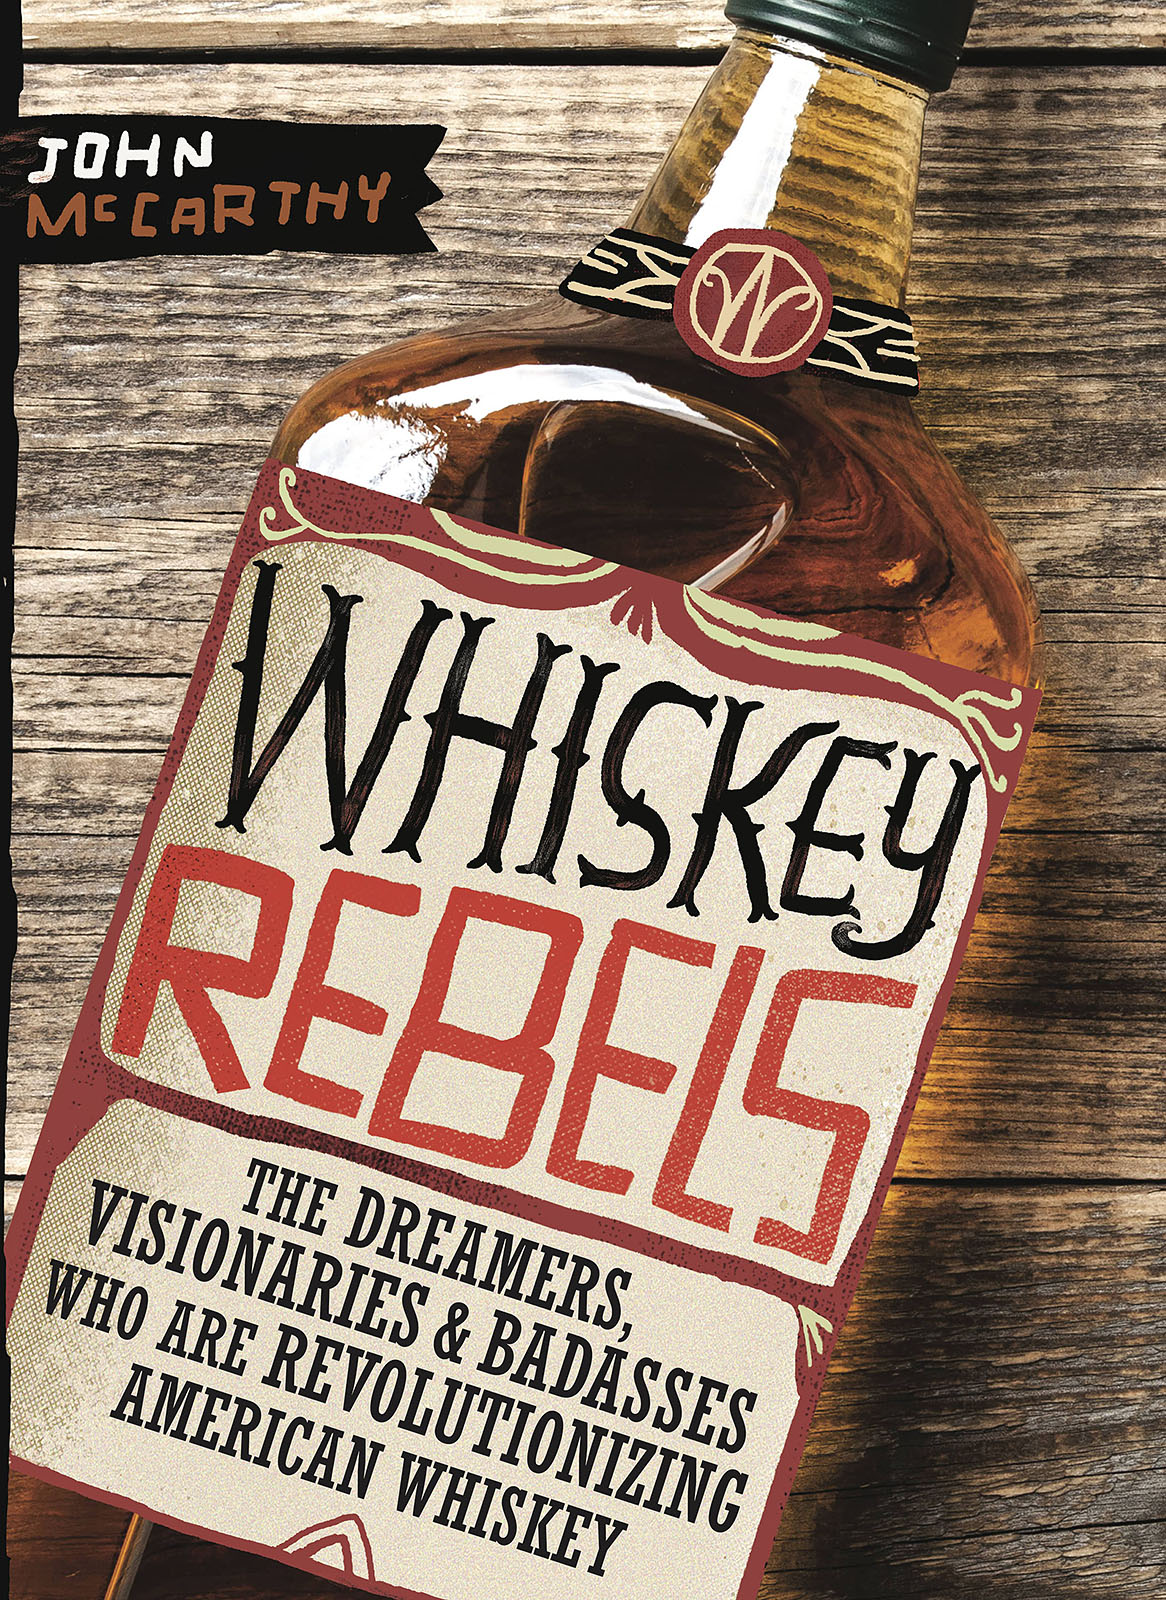 Whiskey Rebels The Dreamers Visionaries Badasses Who Are Revolutionizing American Whiskey - image 1